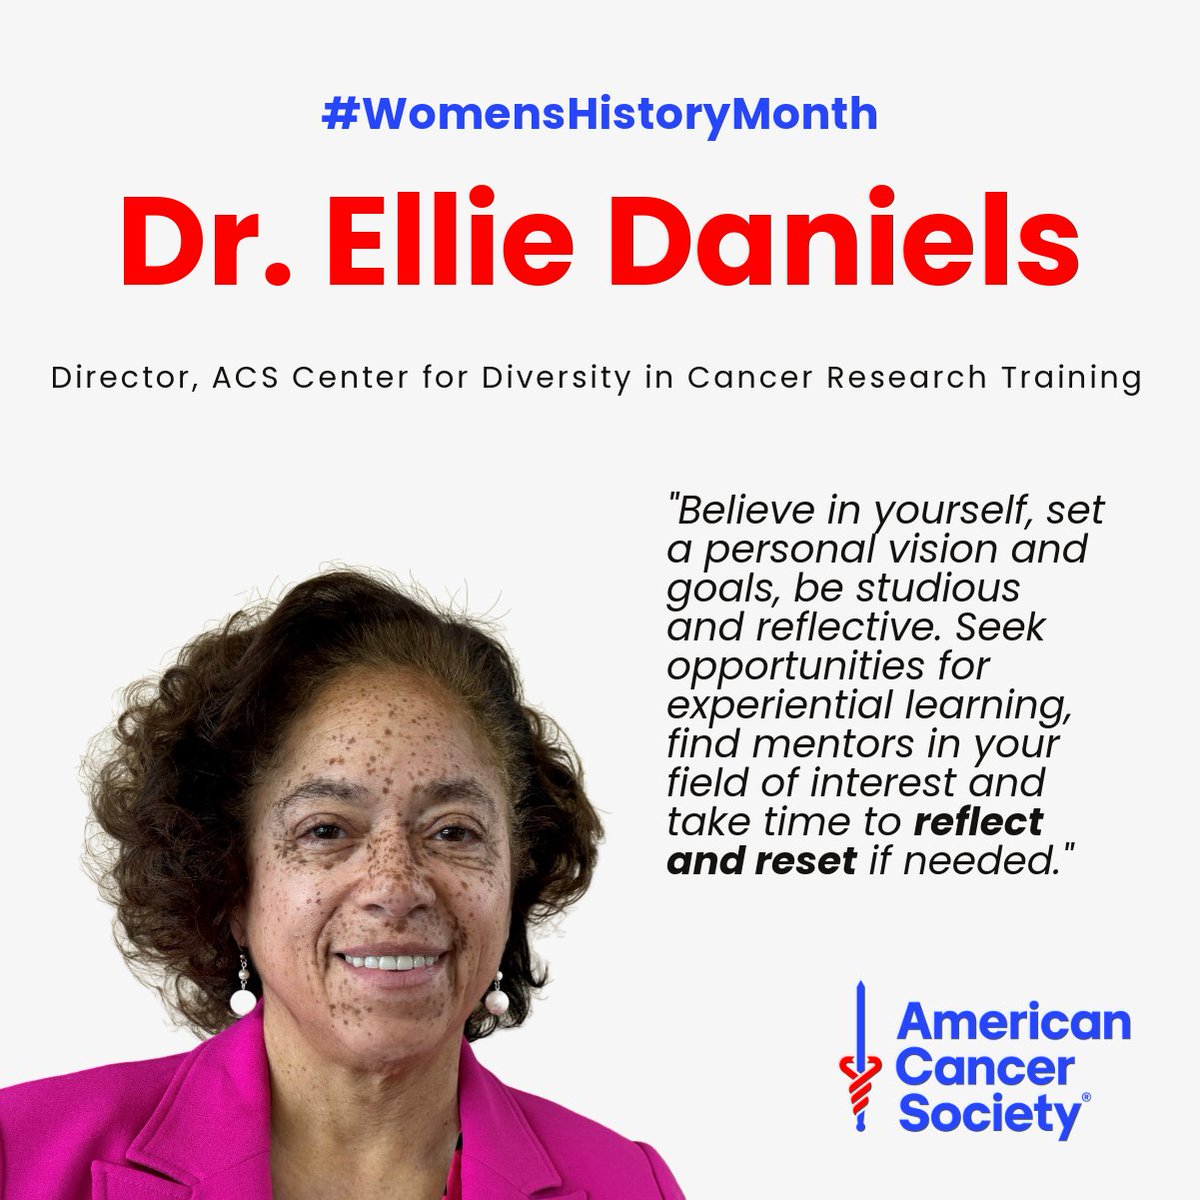 This month, we’re celebrating the inspiring women at ACS. Meet Dr. Ellie Daniels, Director ACS Center for Diversity in Cancer Research Training. She shares some advice for young women pursuing a STEM career path. Learn more about our researchers: amercancer.co/whmresearch